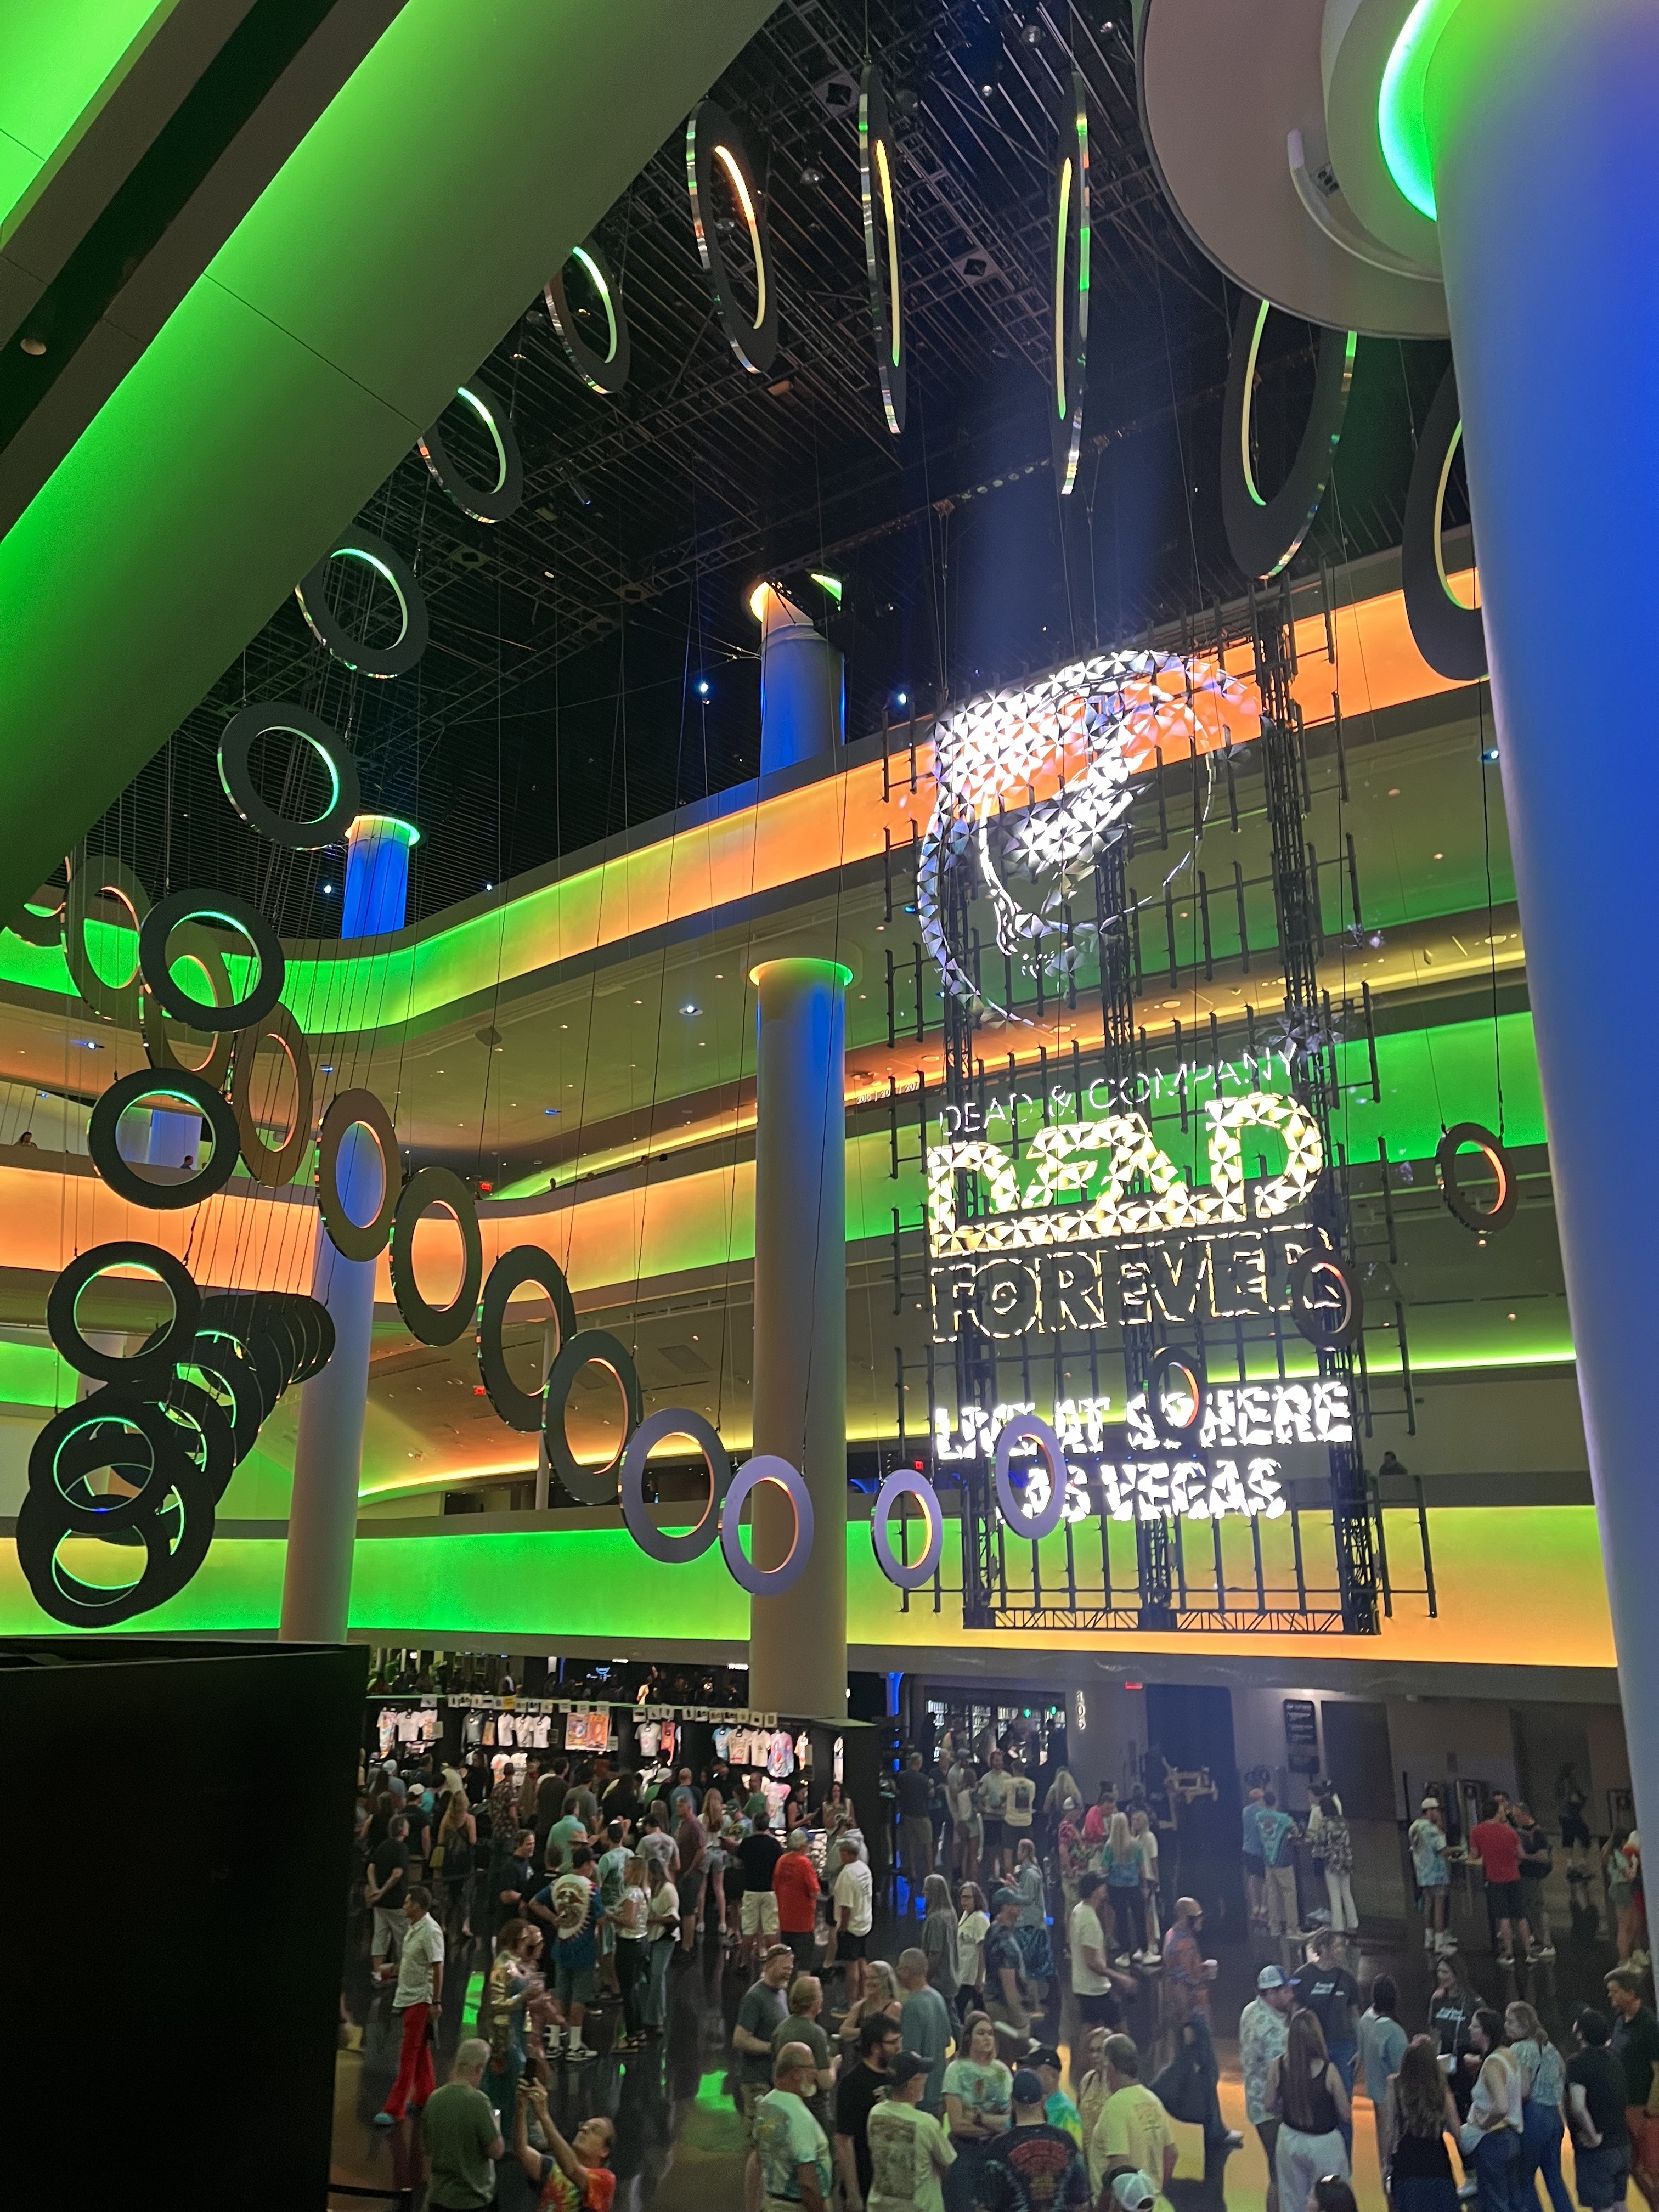 The image shows a large indoor event space with colorful lighting, circular hanging decorations, a crowd of people below, and a large illuminated sign that reads “Dead &amp; Company, The Final Tour.”